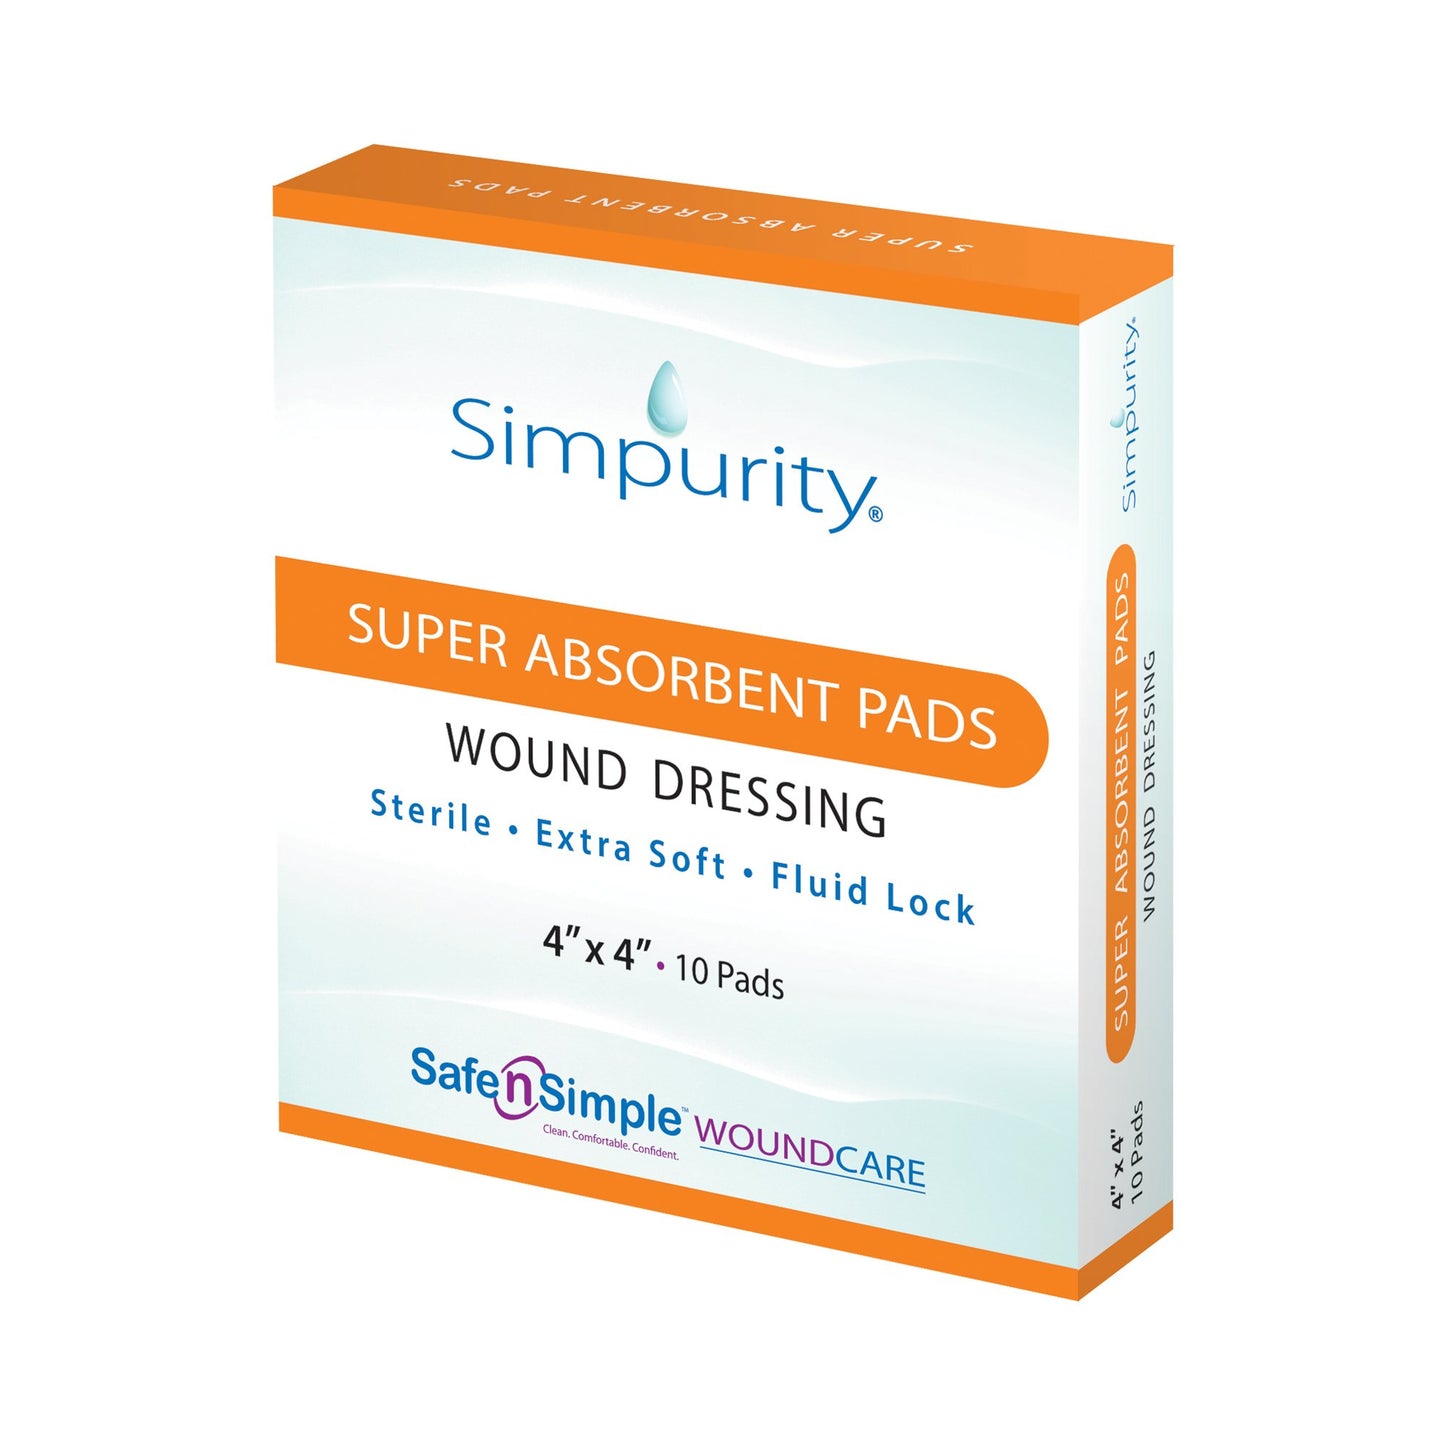 Simpurity Super Absorbent Pad Wound Dressing, 4" x 4"